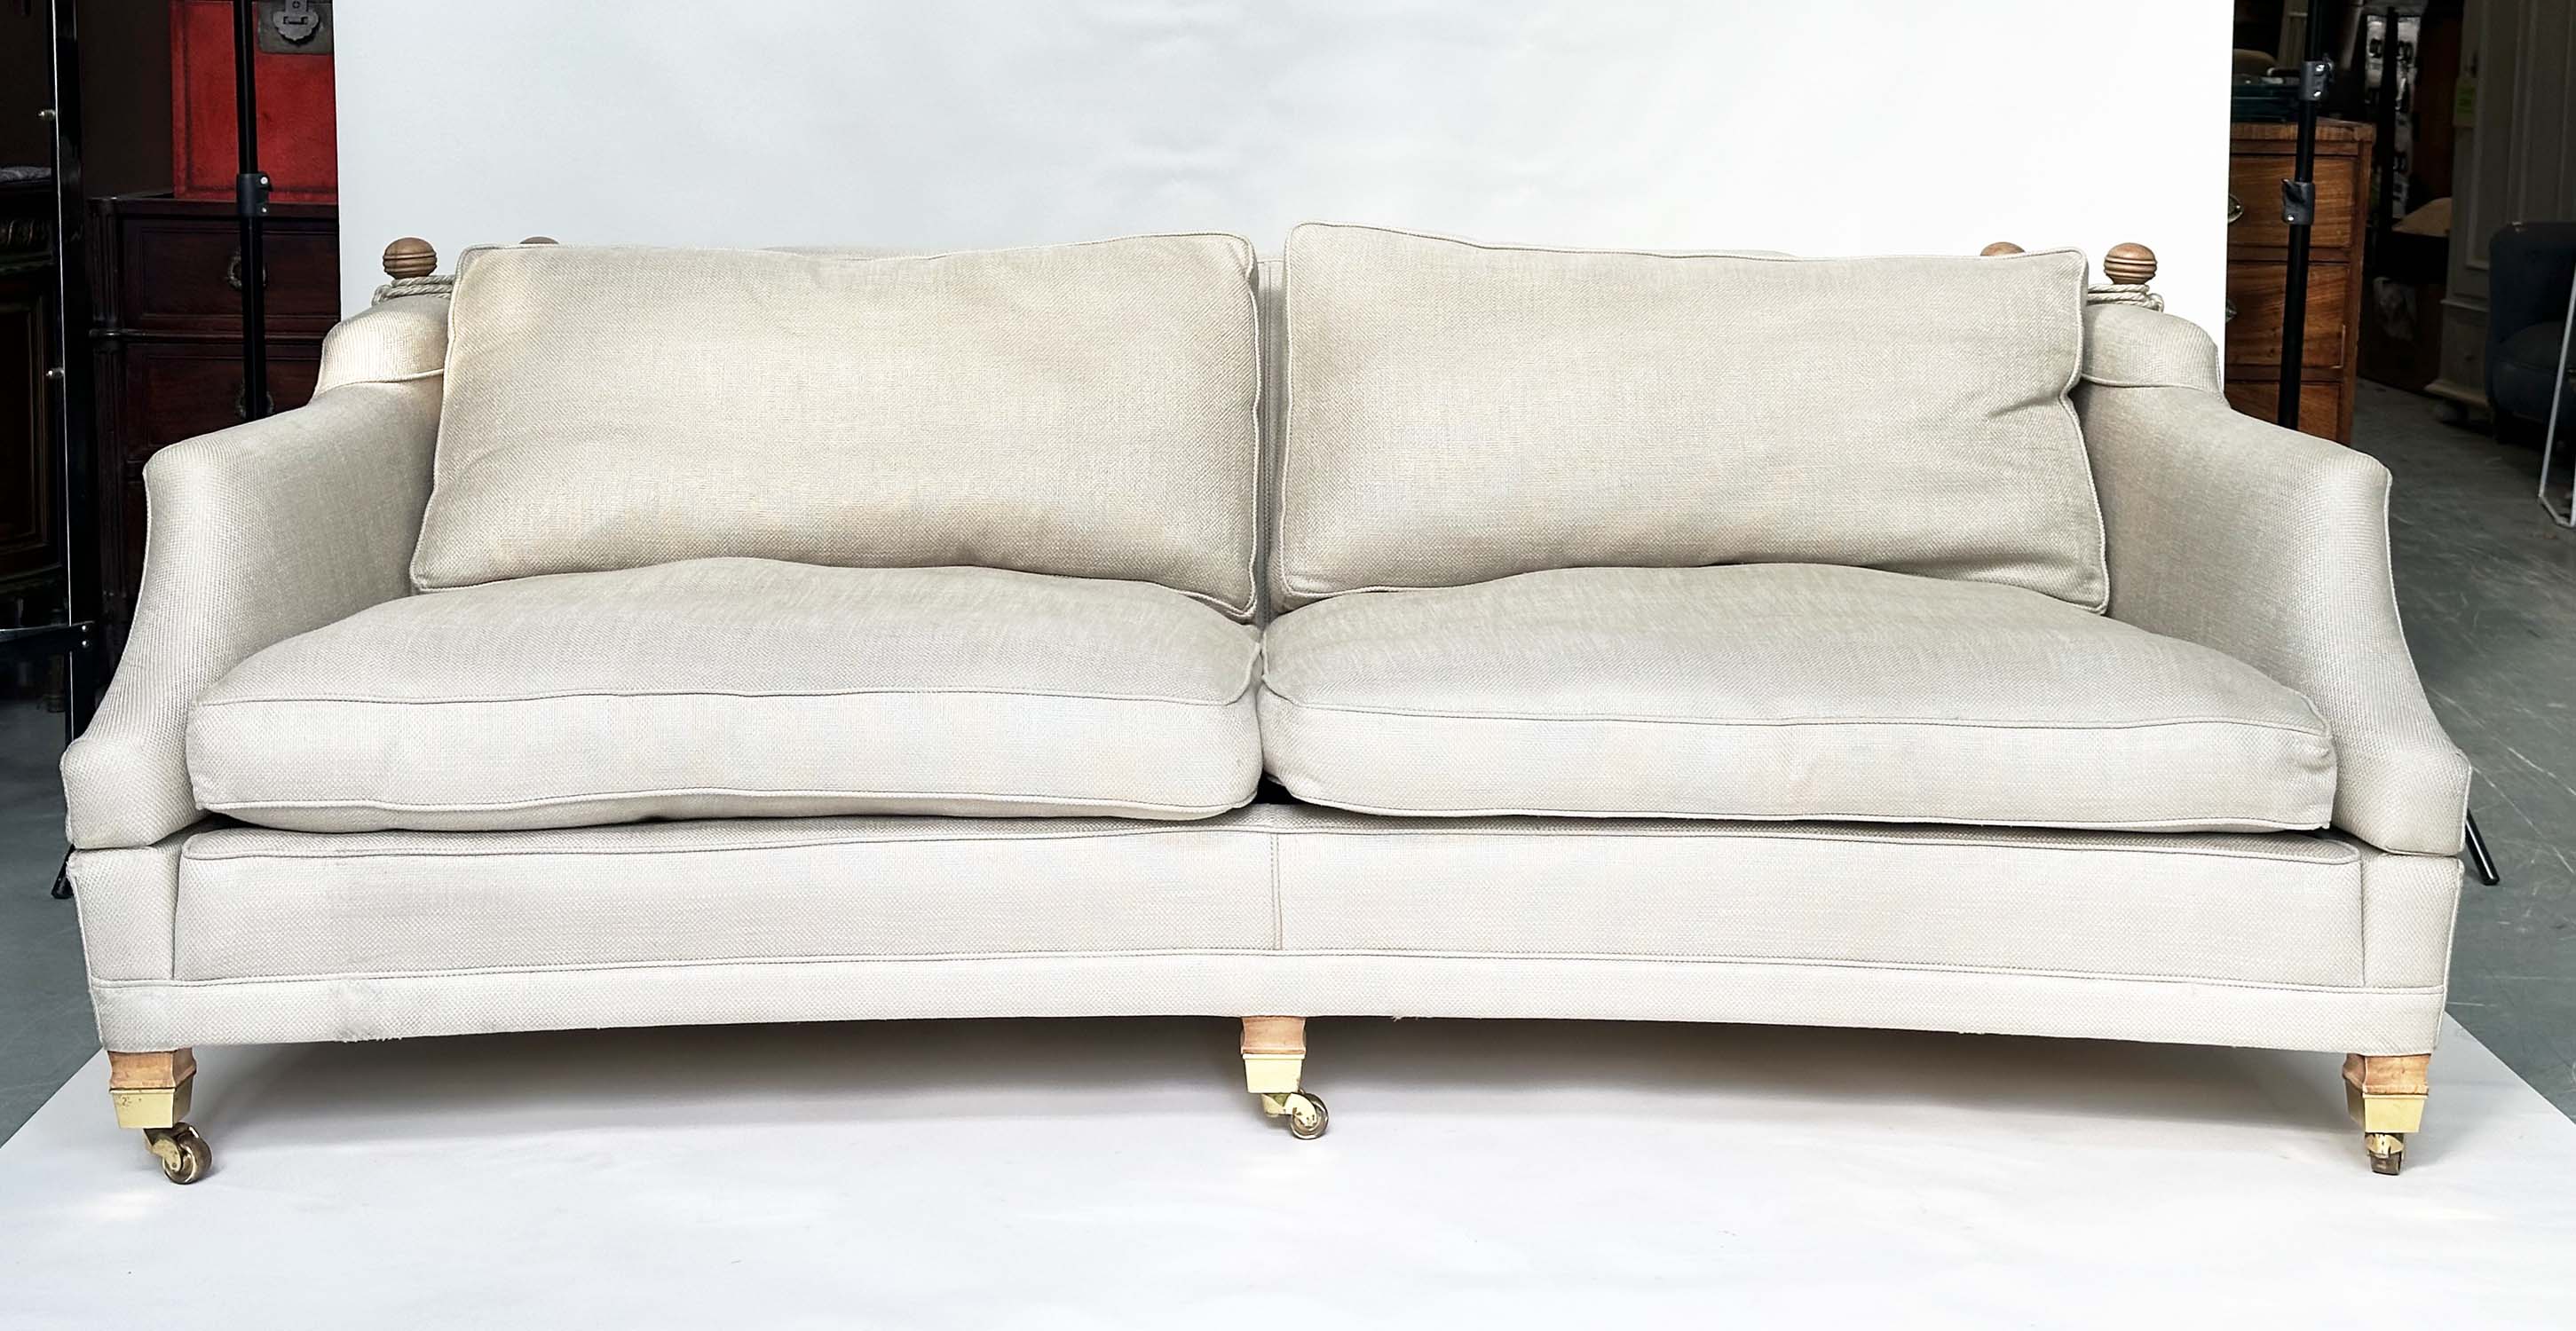 KNOLL SOFA BY DURESTA, grey linen upholstered with down swept arms, feather filled cushions and - Image 14 of 14